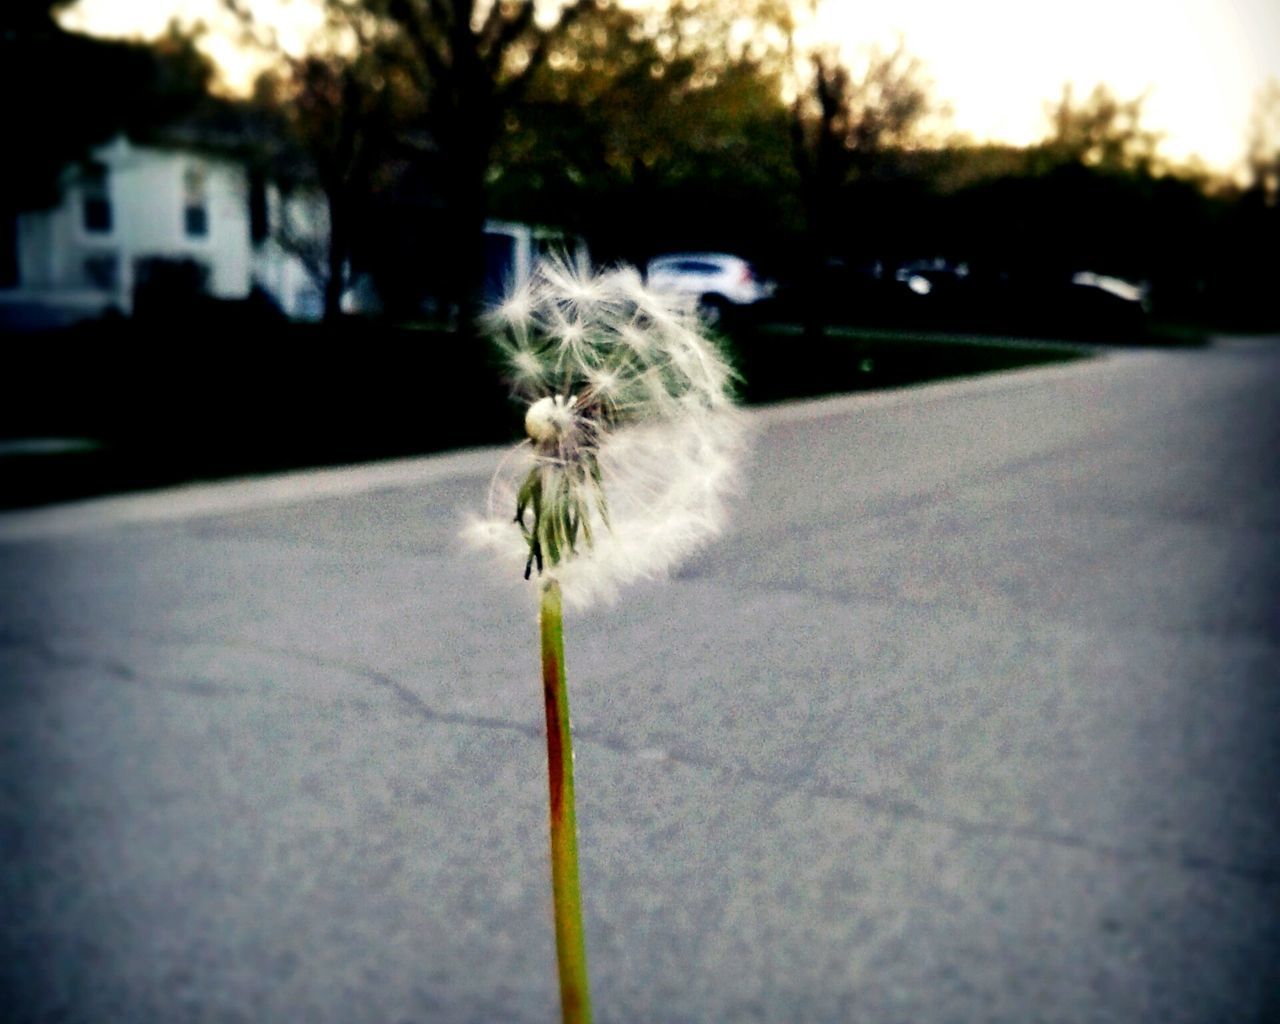 flower, focus on foreground, fragility, growth, dandelion, freshness, stem, close-up, flower head, nature, plant, beauty in nature, selective focus, outdoors, day, no people, petal, softness, botany, in bloom, tranquility, growing, white, sky